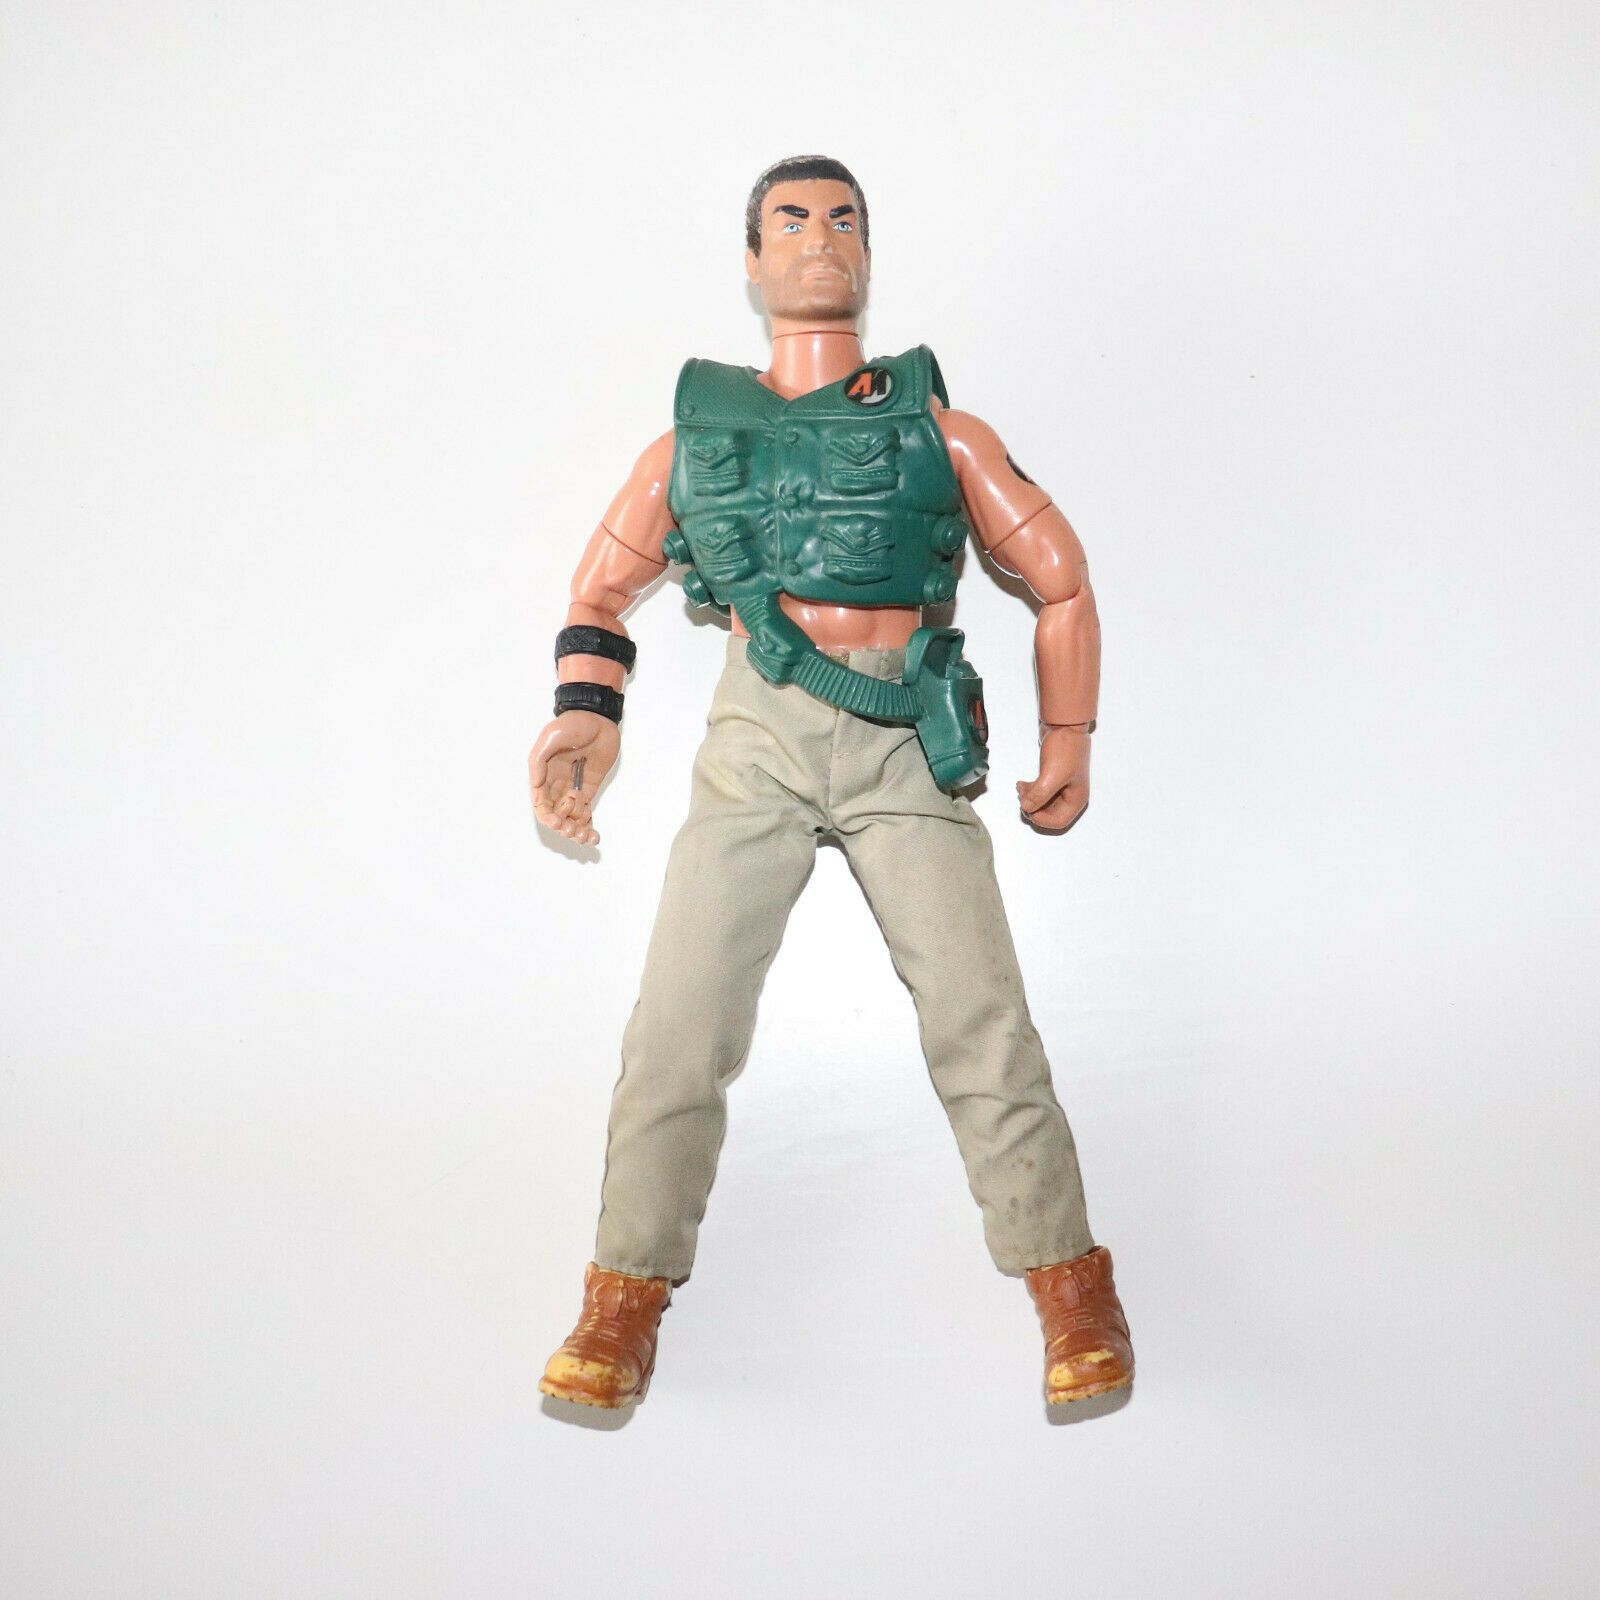 action man toys